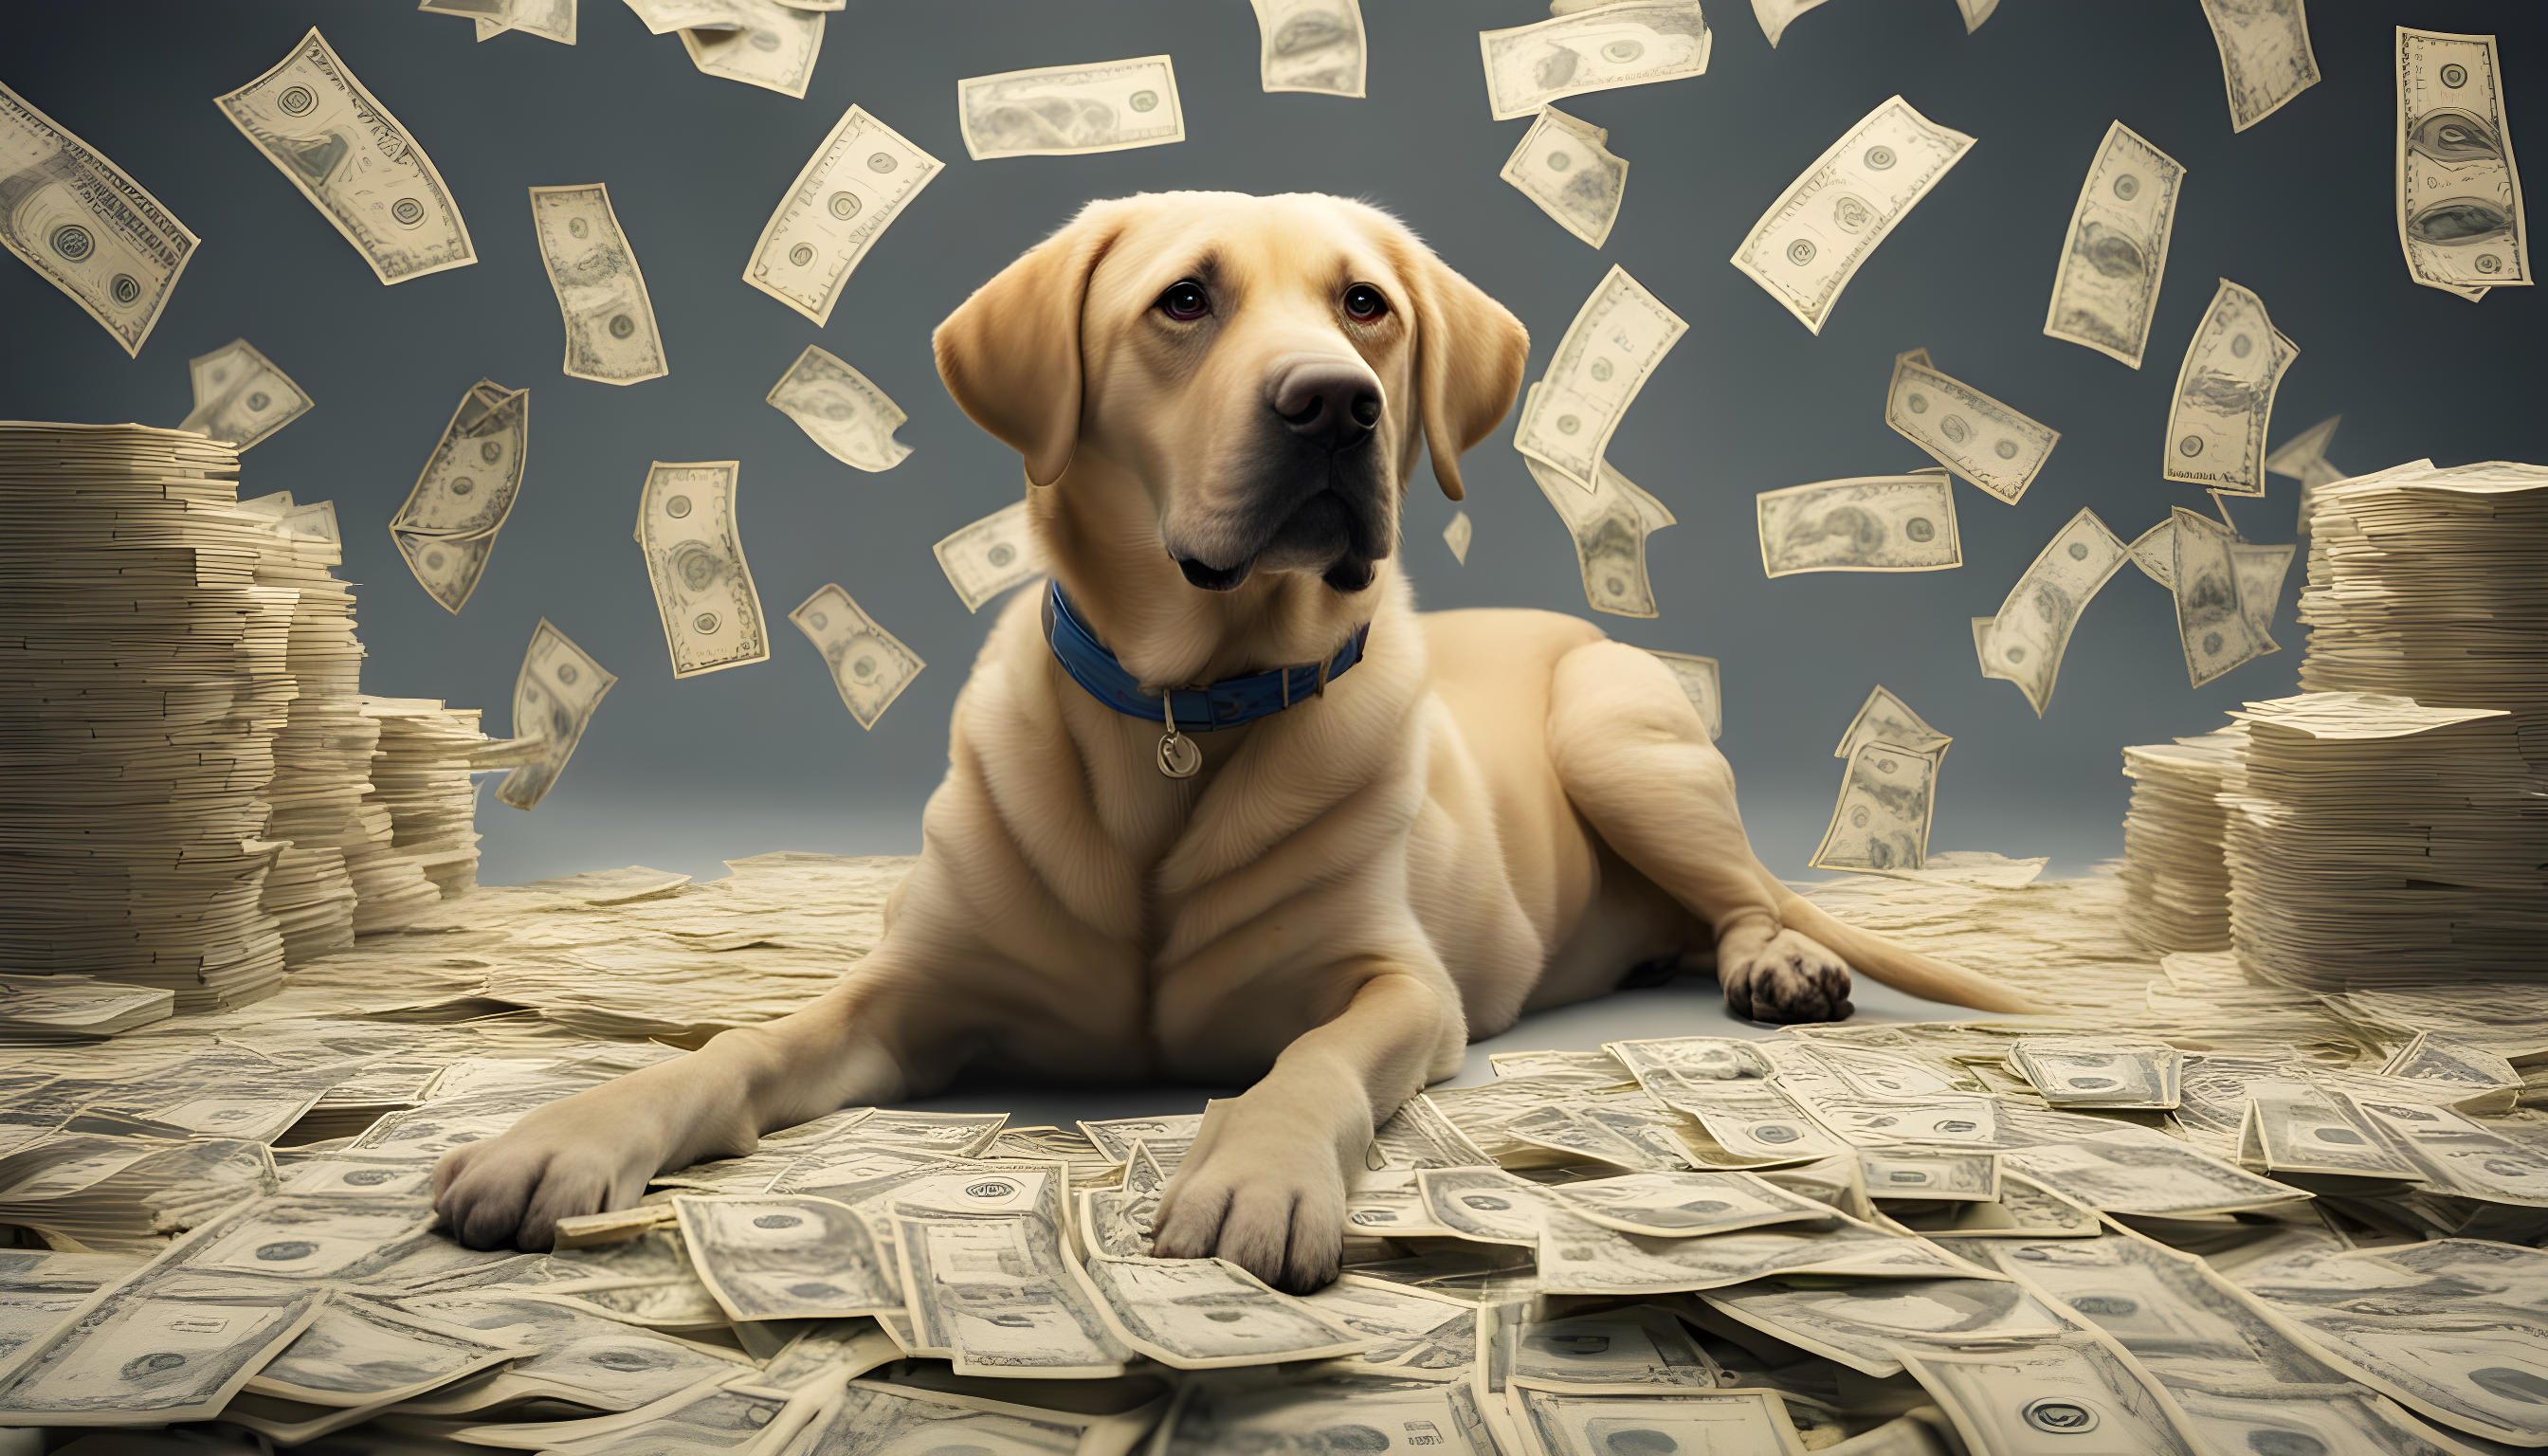 A Brindle Labrador surrounded by price tags and dollar signs, satirizing the notion of its perceived rarity and value.